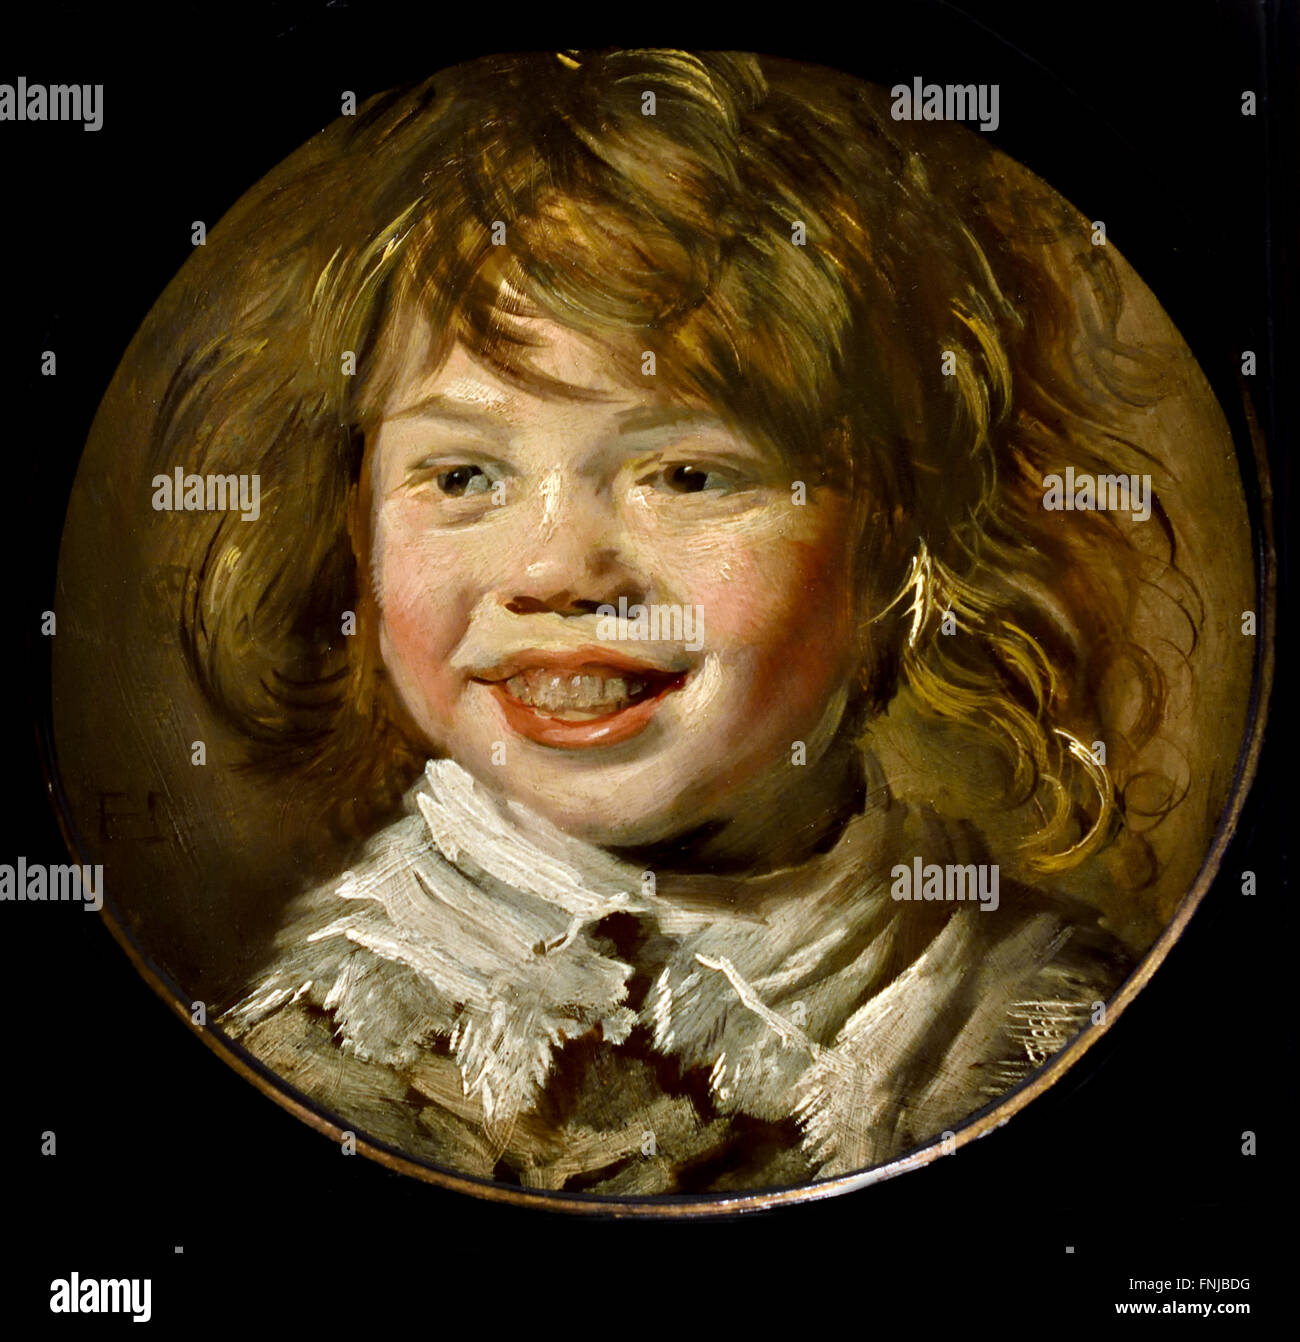 The Smiling - Laughing 1625 boy Frans Hals 1582-1666  Dutch Netherlands Stock Photo